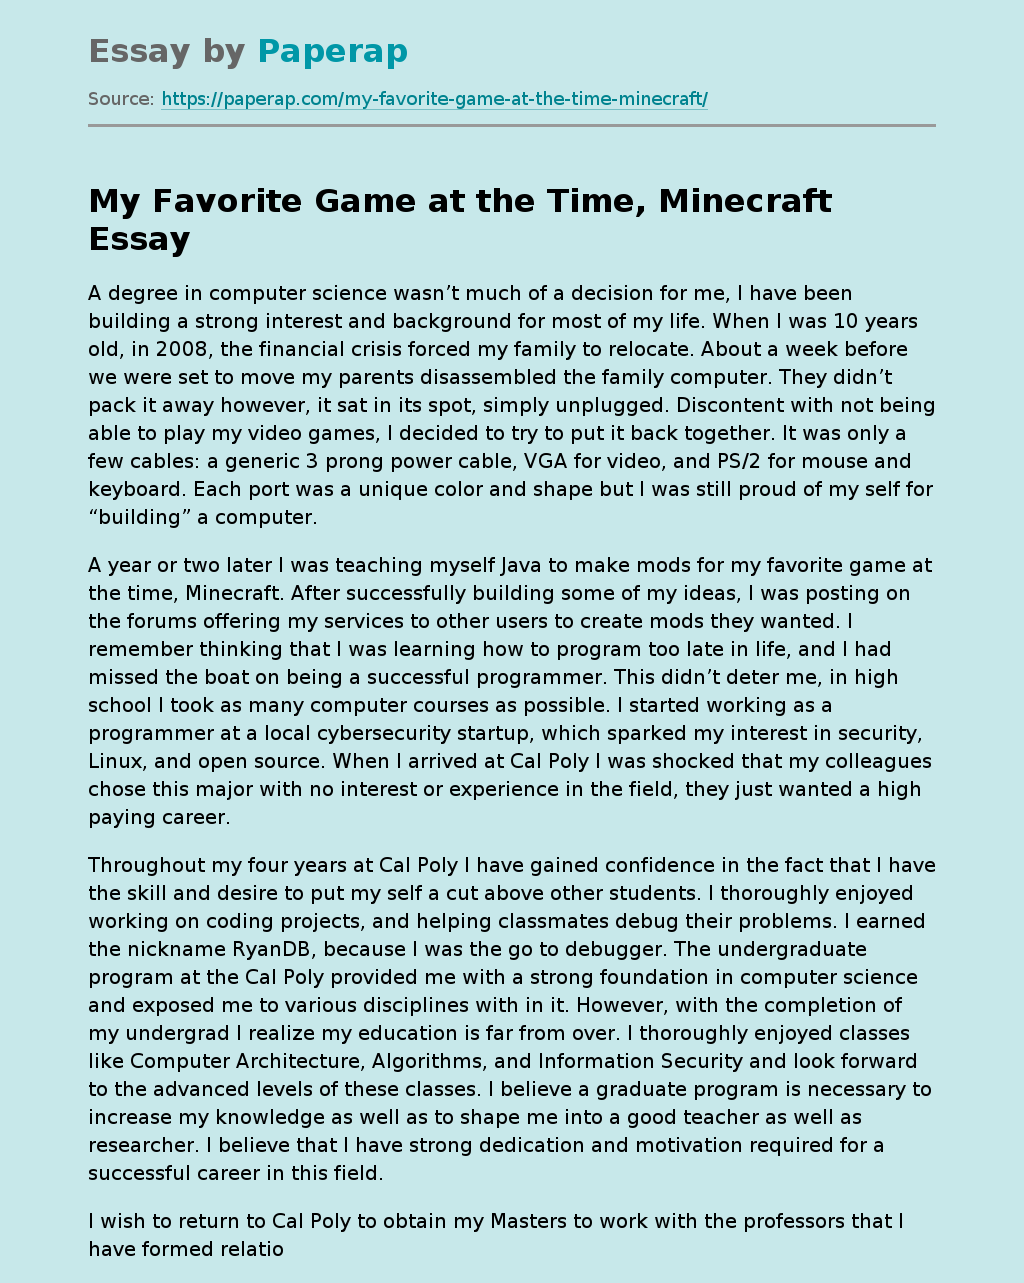 My Favorite Game at the Time, Minecraft